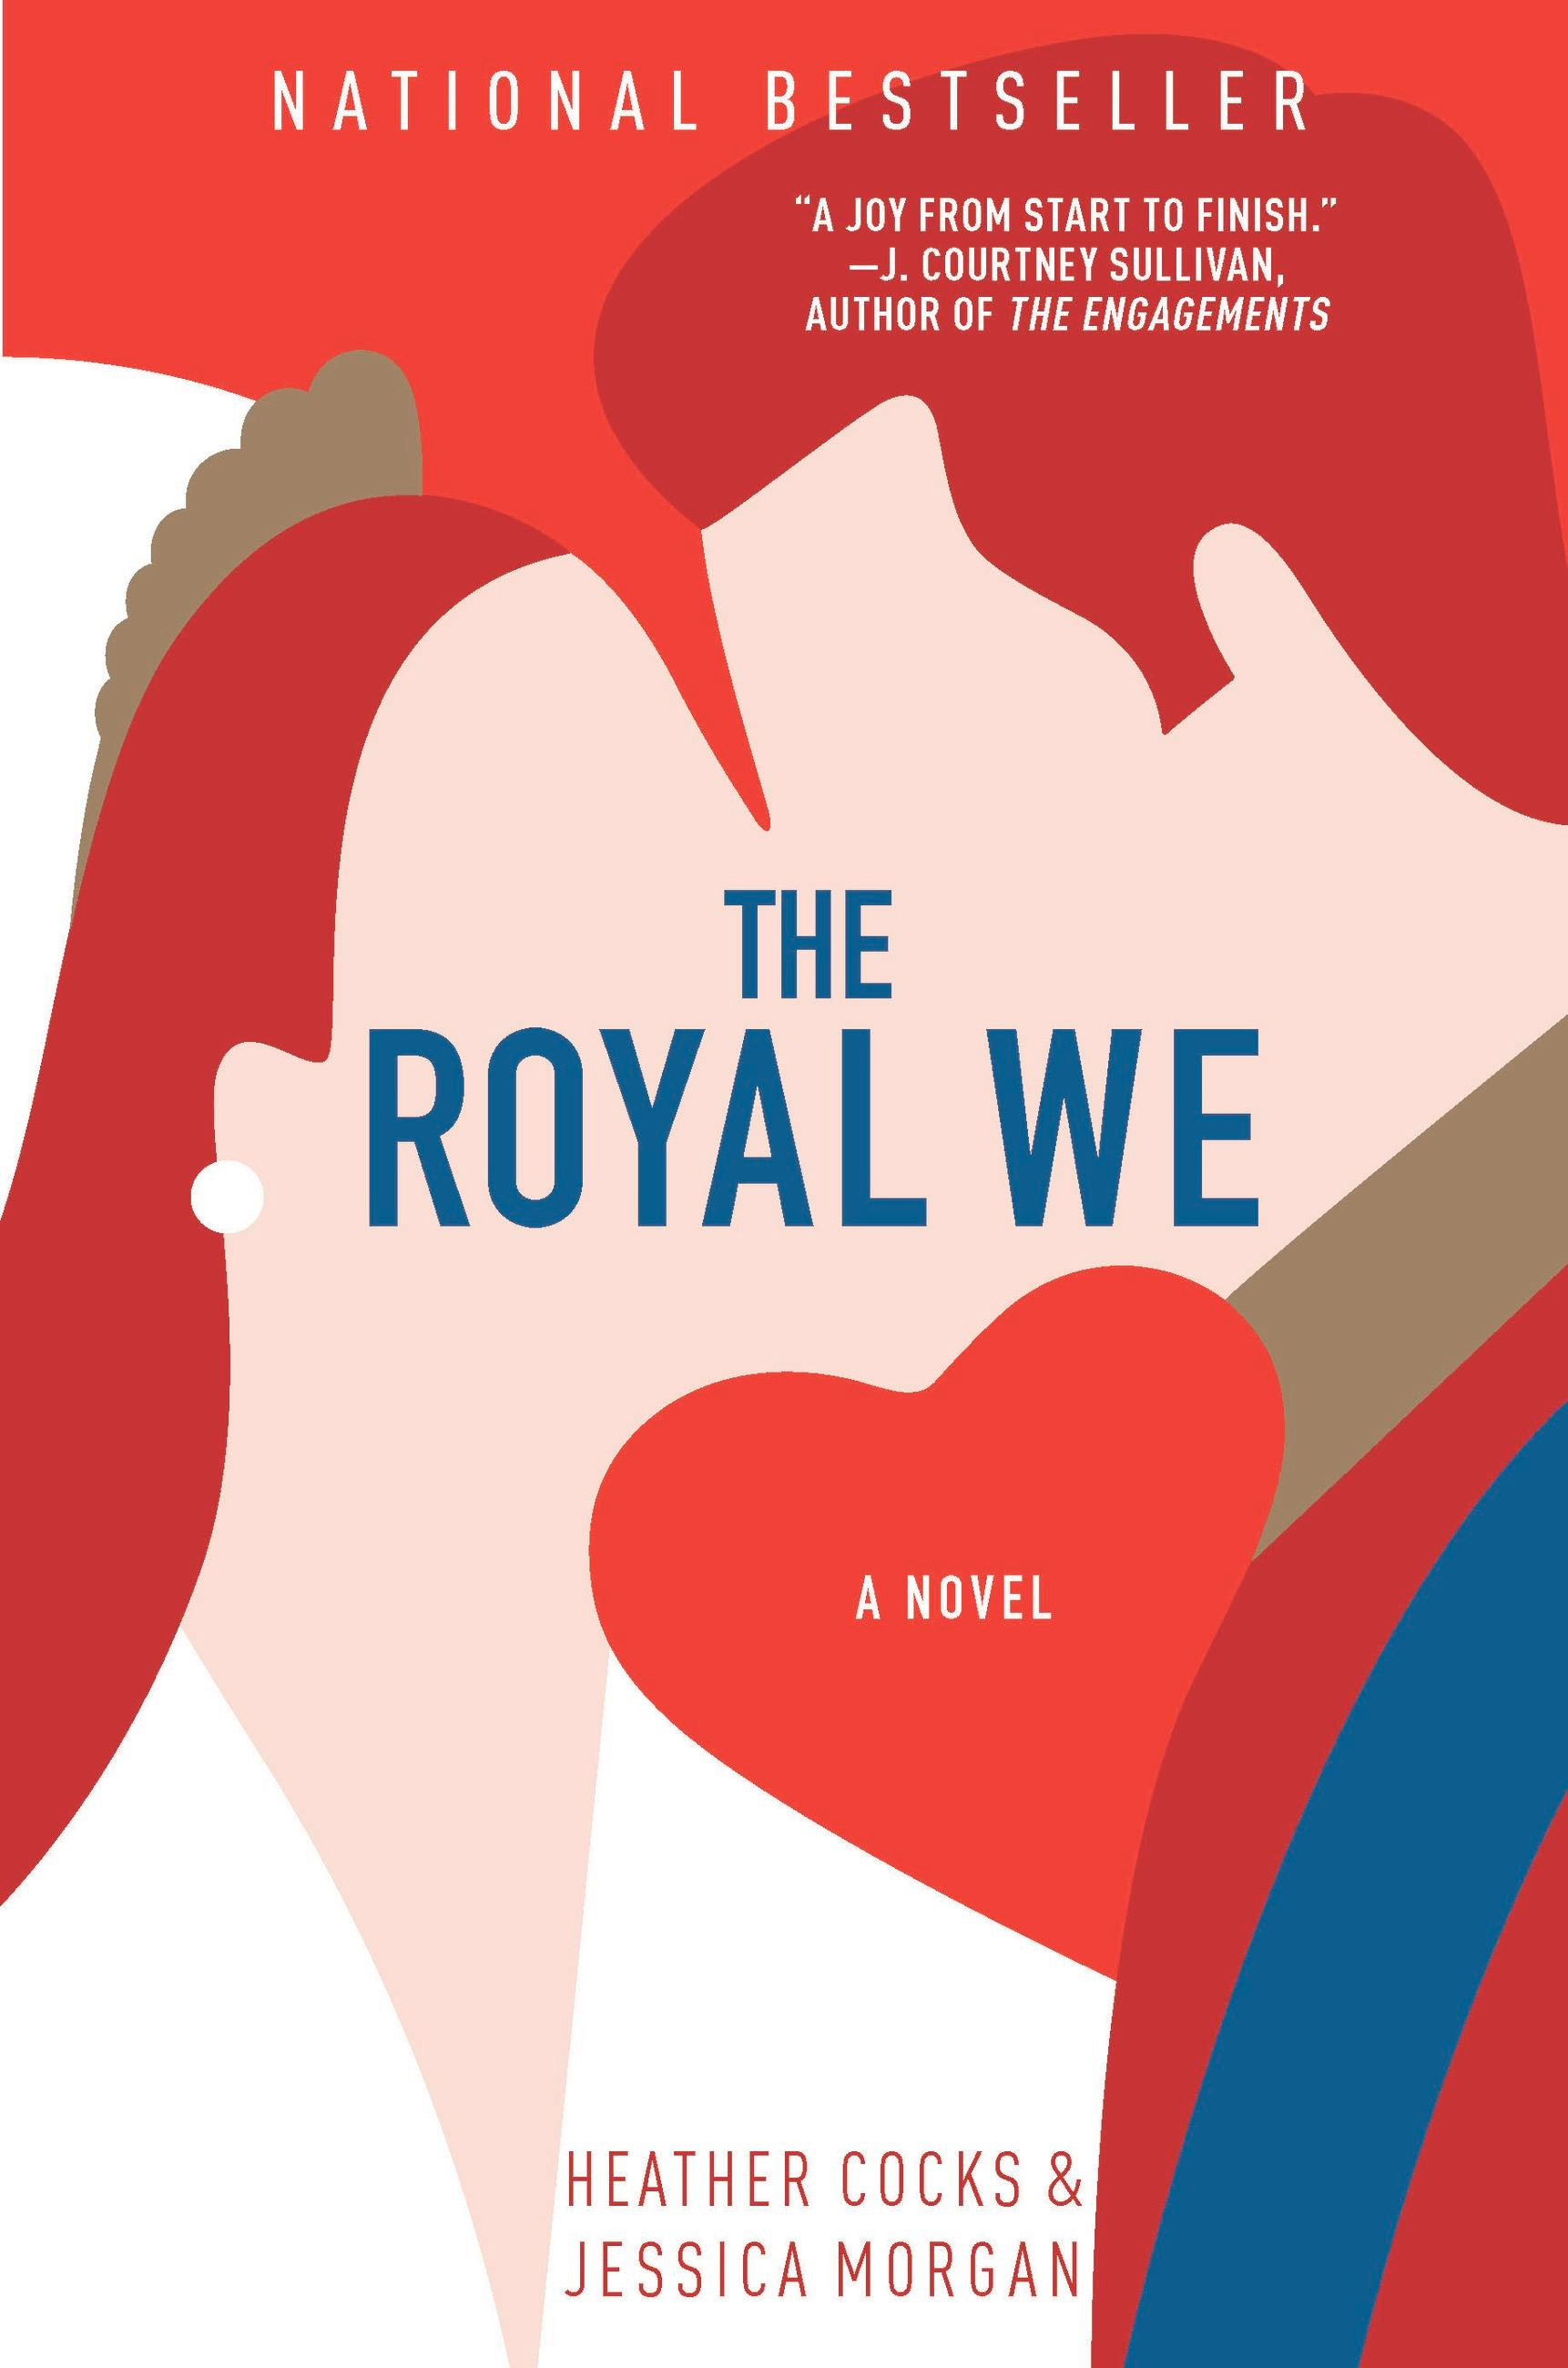 Image for "The Royal We"